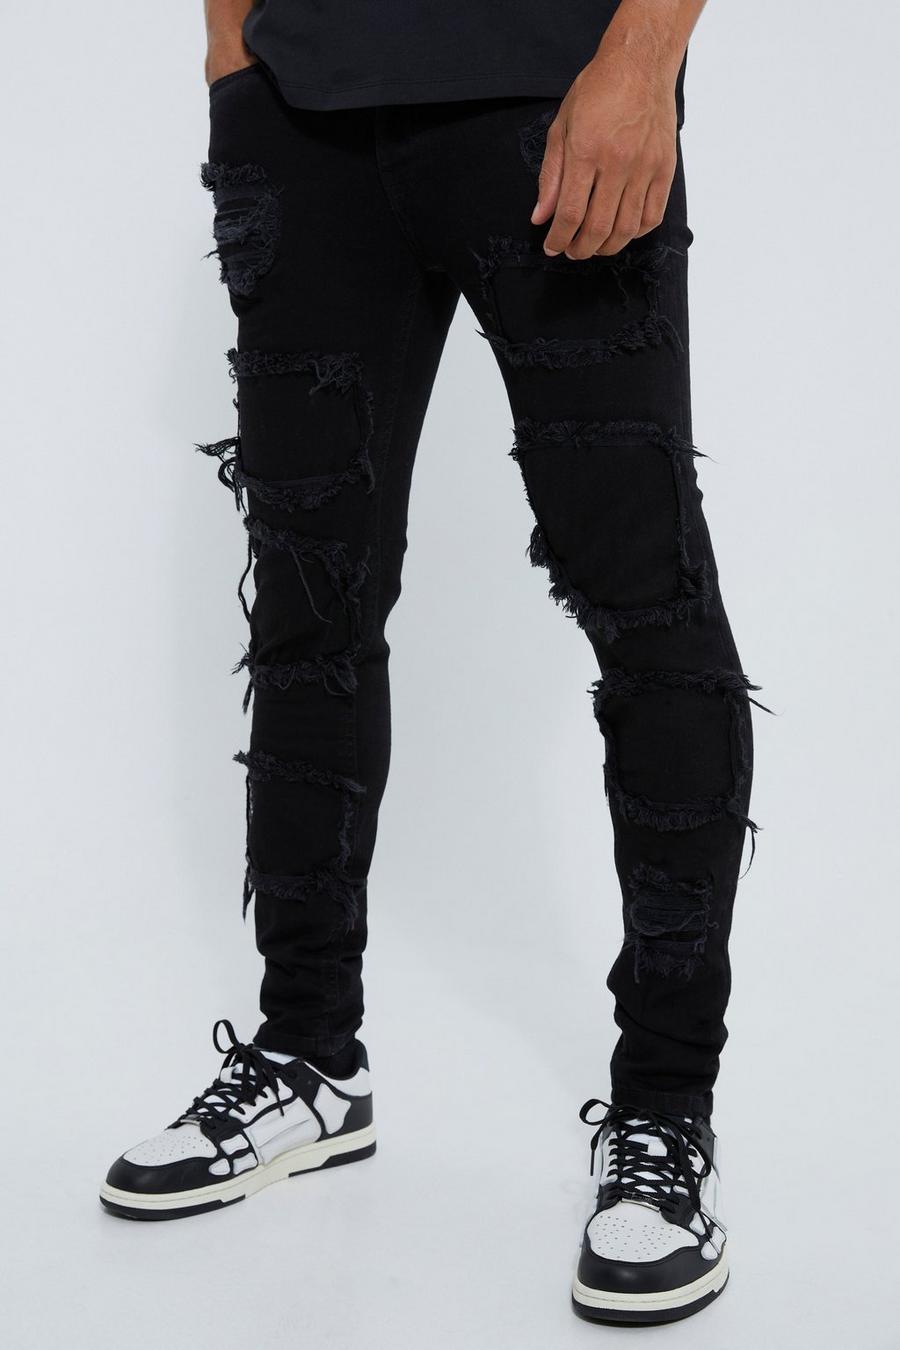 Item of the week: the distressed jeans